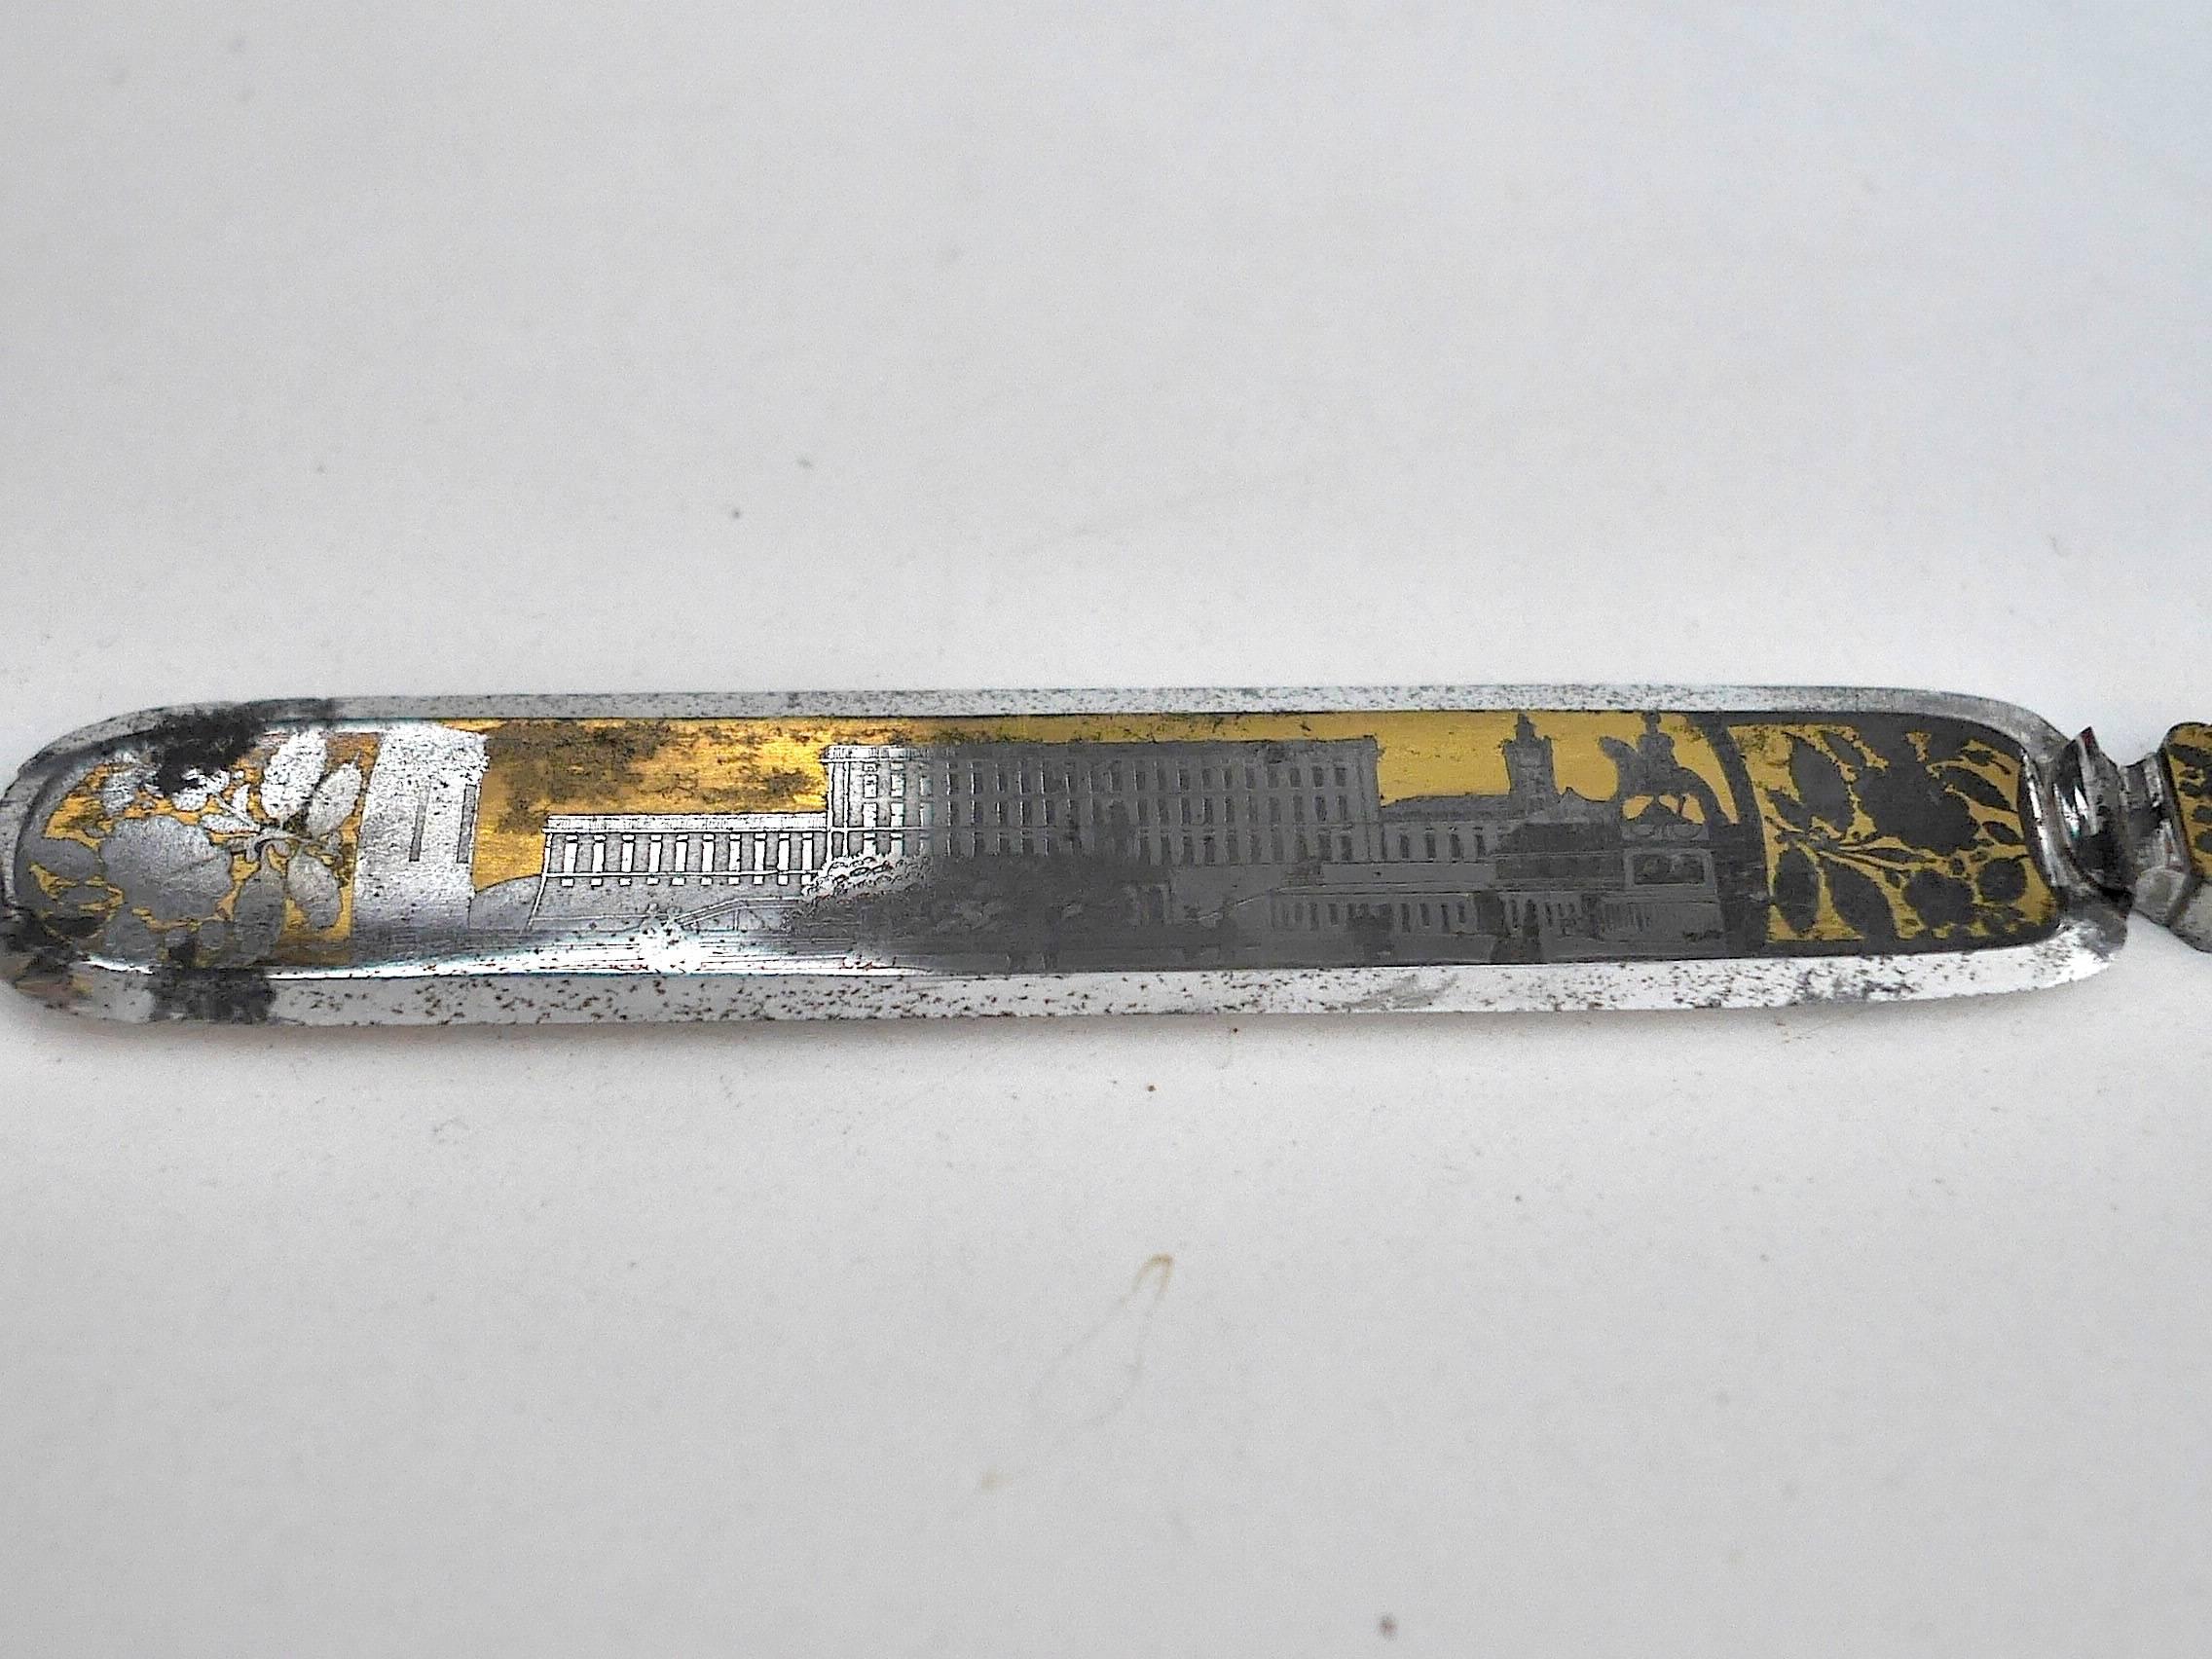 Beautiful steal paper knife inlaid with gold leaves, featuring a floral decors and views of Swedish monuments. It was dedicated to Jeanne Defresnes whose name is engraved on one side of the blade.
It has been manufactured in Sweden by Adolf